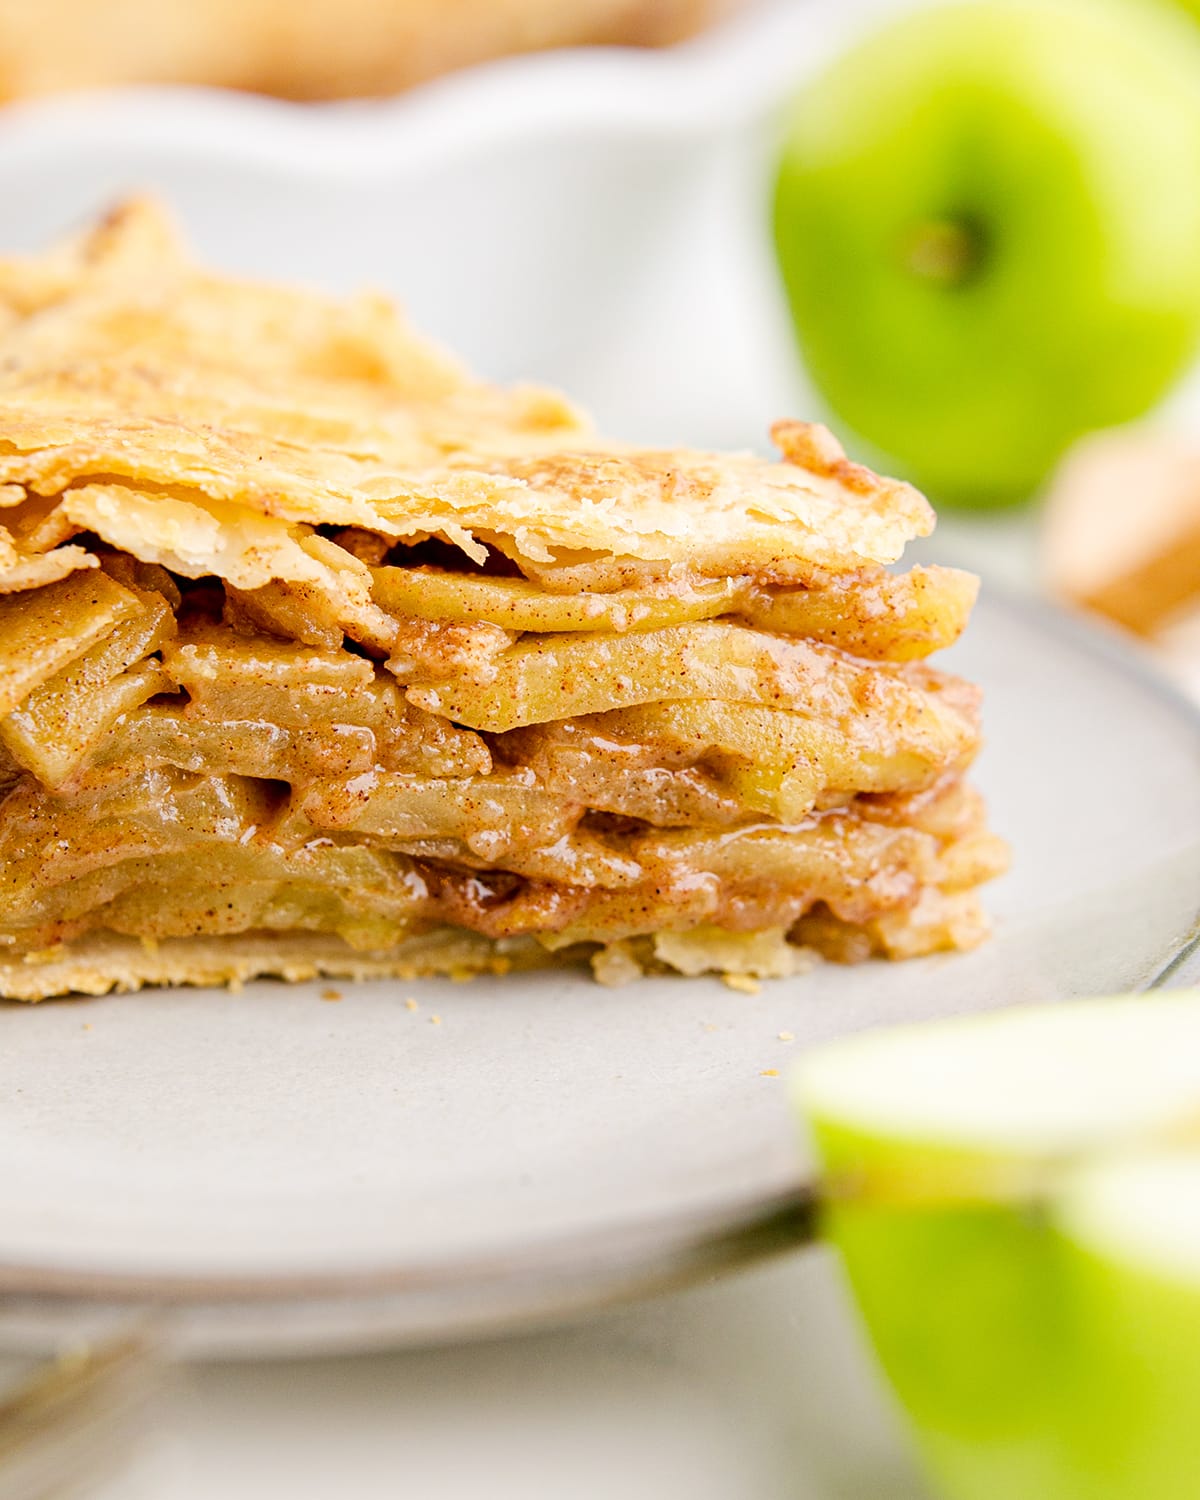 A close up of a slice of apple pie showing all the layers of apple slices and the crust on top.